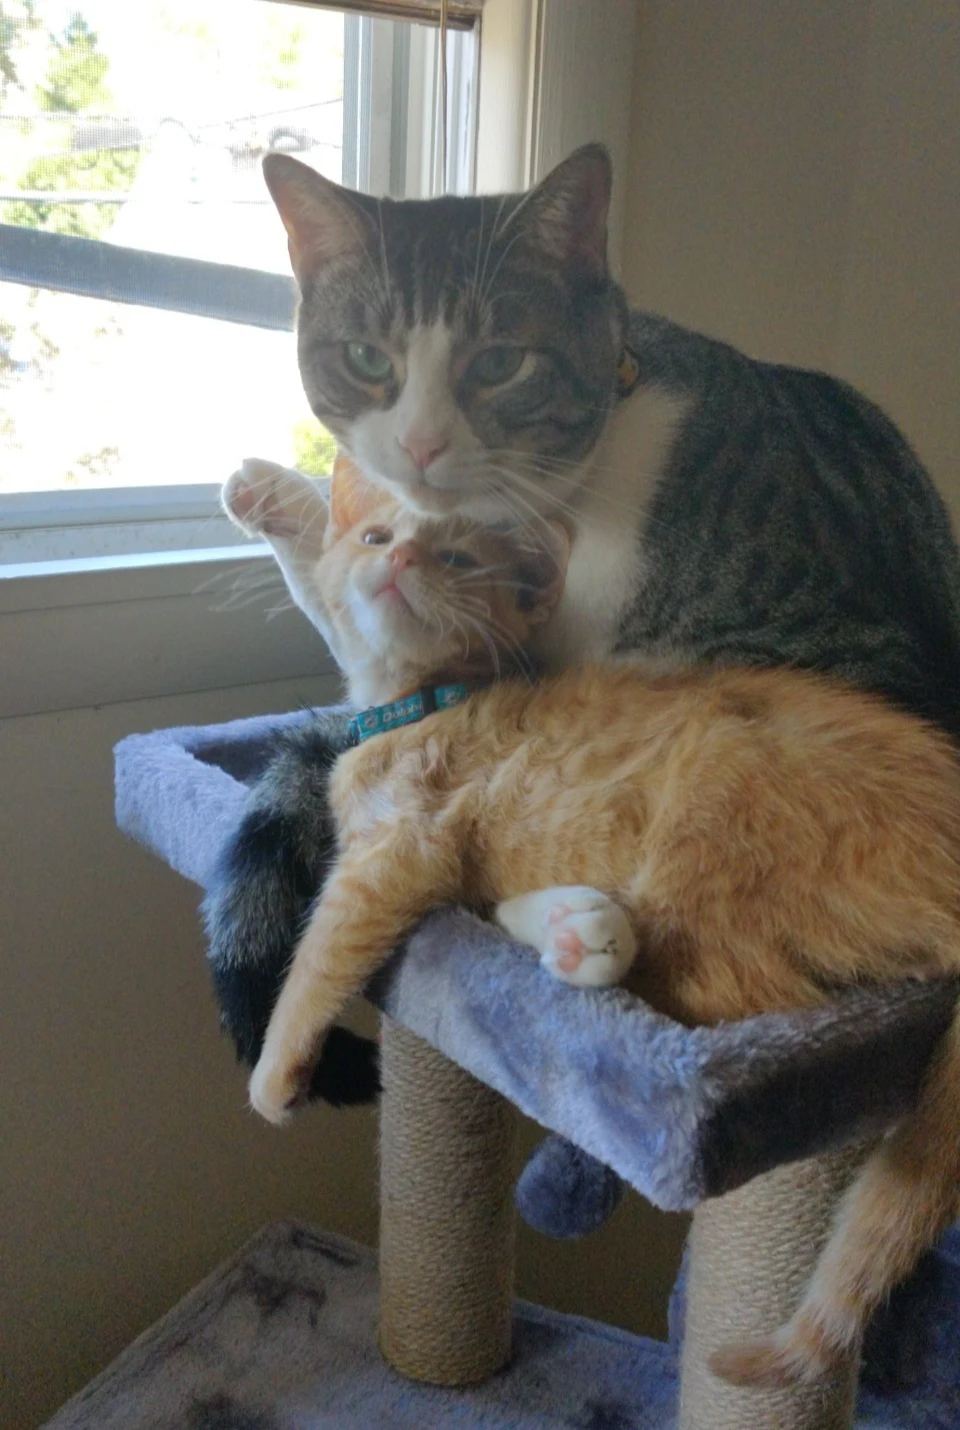 I was worried my cat wouldn't get along with my new kitten, today I found them like this